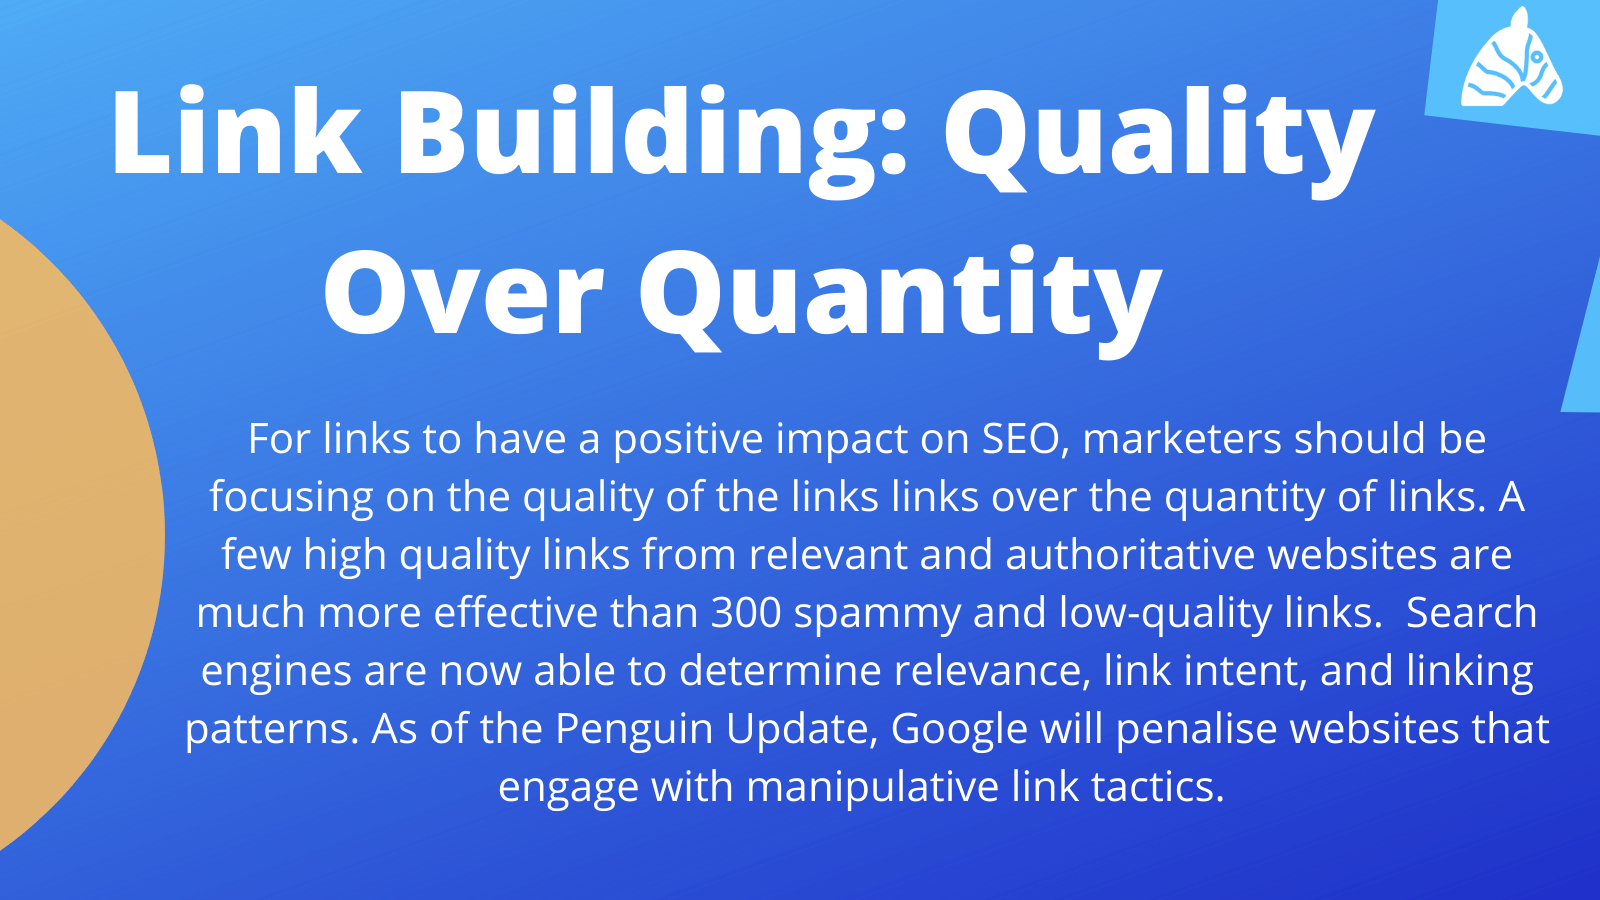 Information about the value of quality backlinks over quantity of backlinks for SEO